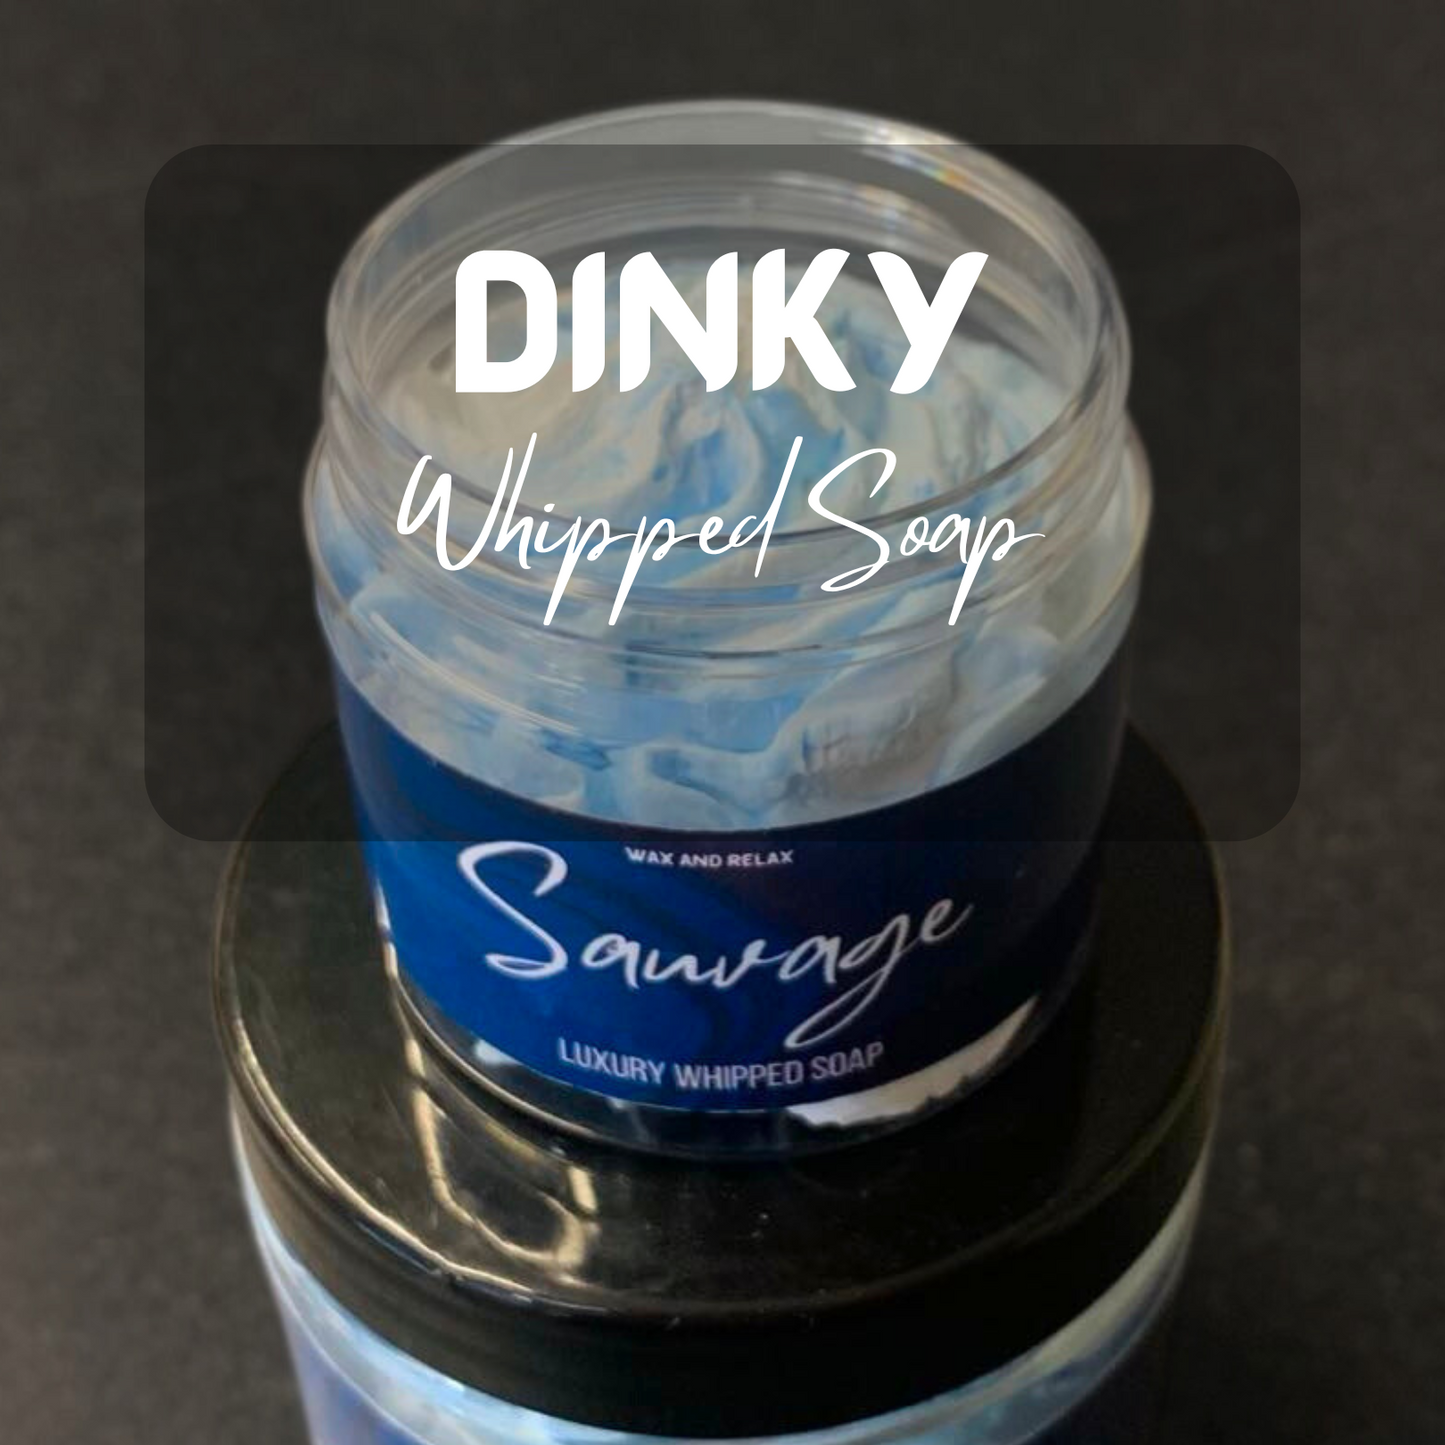 Sauvage Luxury Whipped Soap